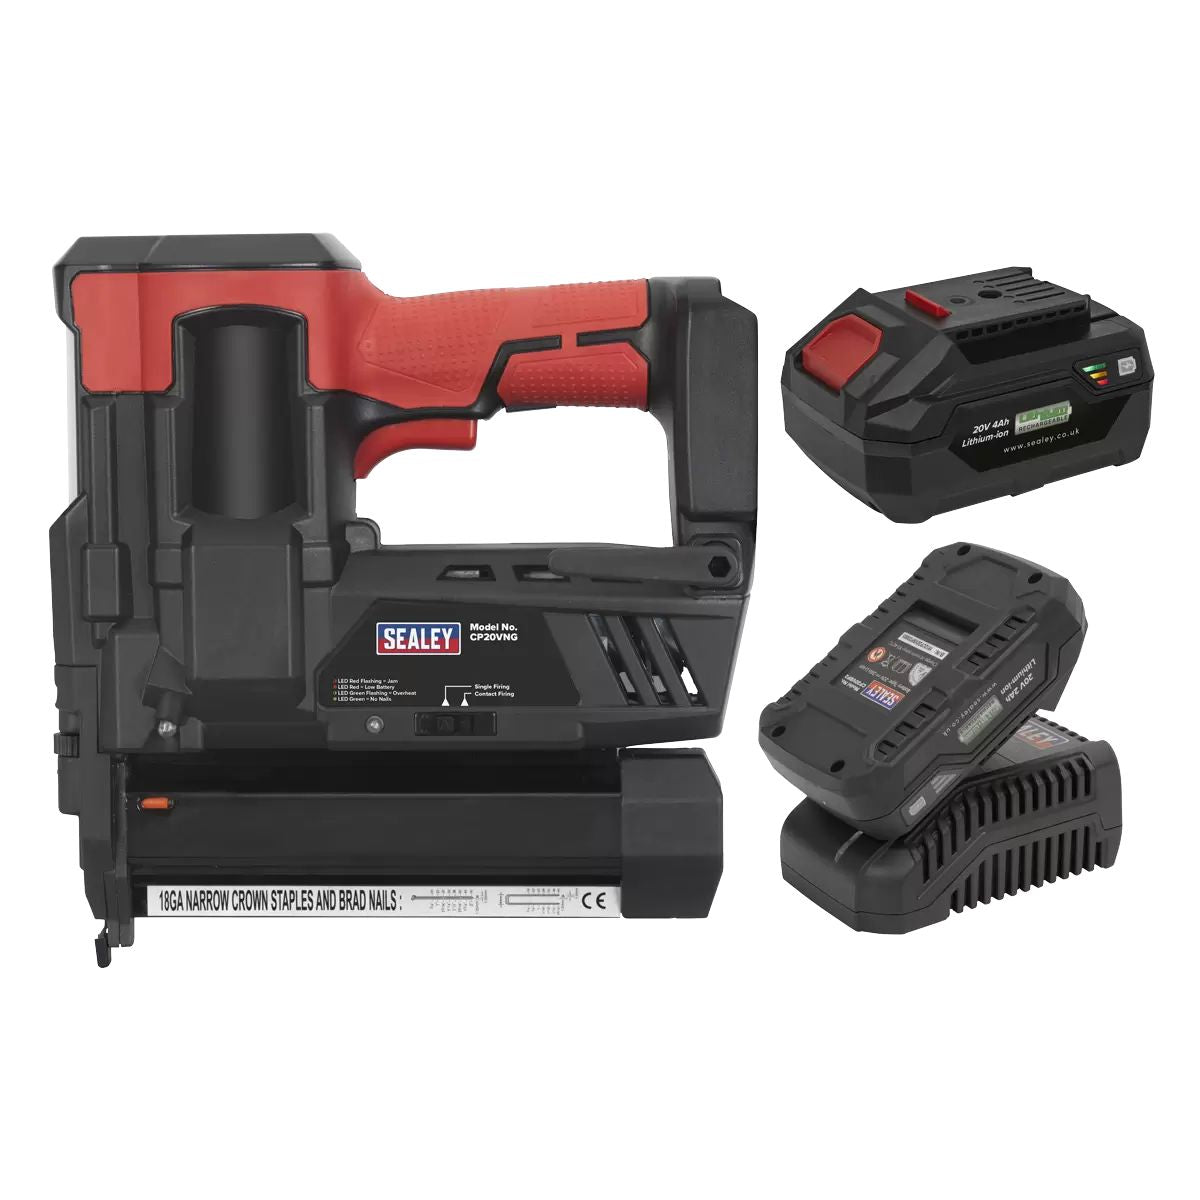 Sealey CP20VNGKIT 20V Cordless Staple 18G Nail Gun Kit with 1 x 2 Battery & Charger in Bag